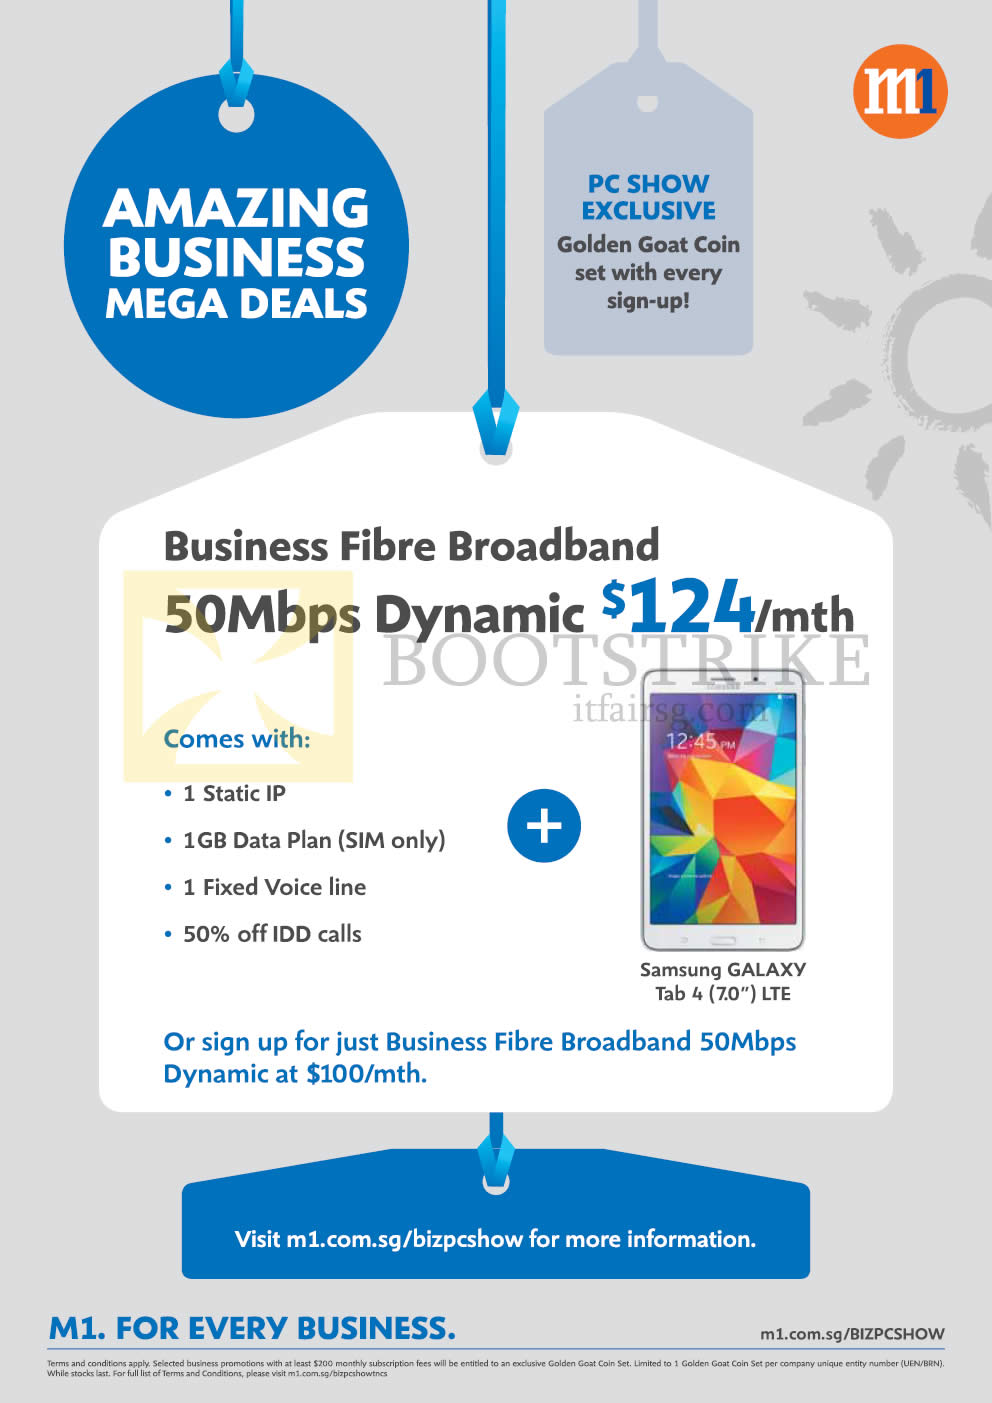 PC SHOW 2015 price list image brochure of M1 Business Fibre Broadband 50Mbps Dynamic